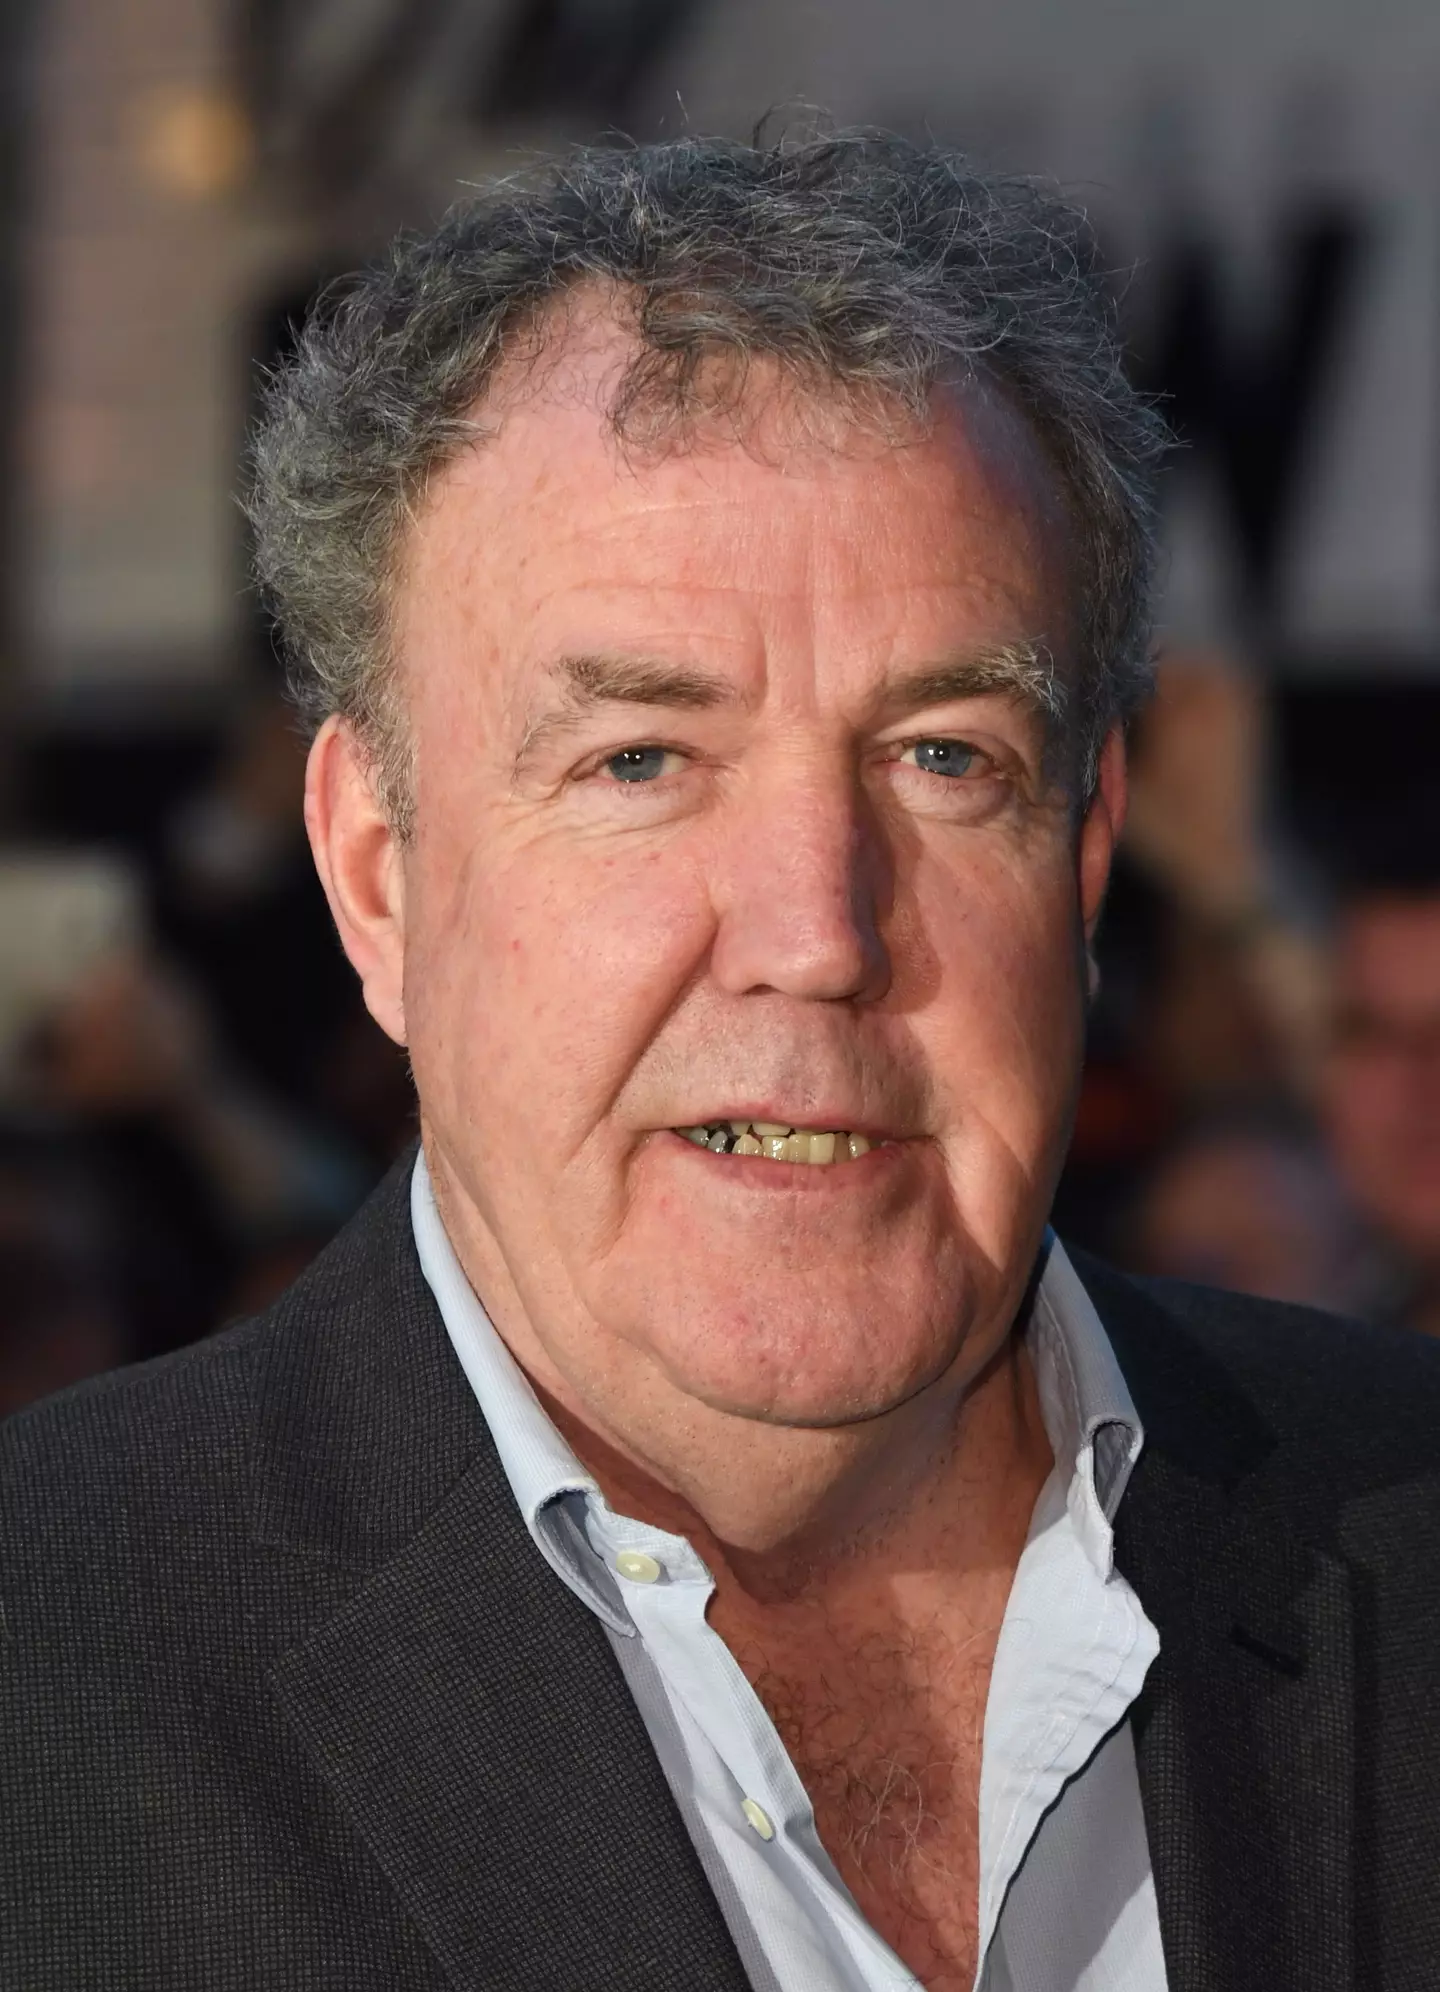 Clarkson says his risk of developing dementia has doubled.